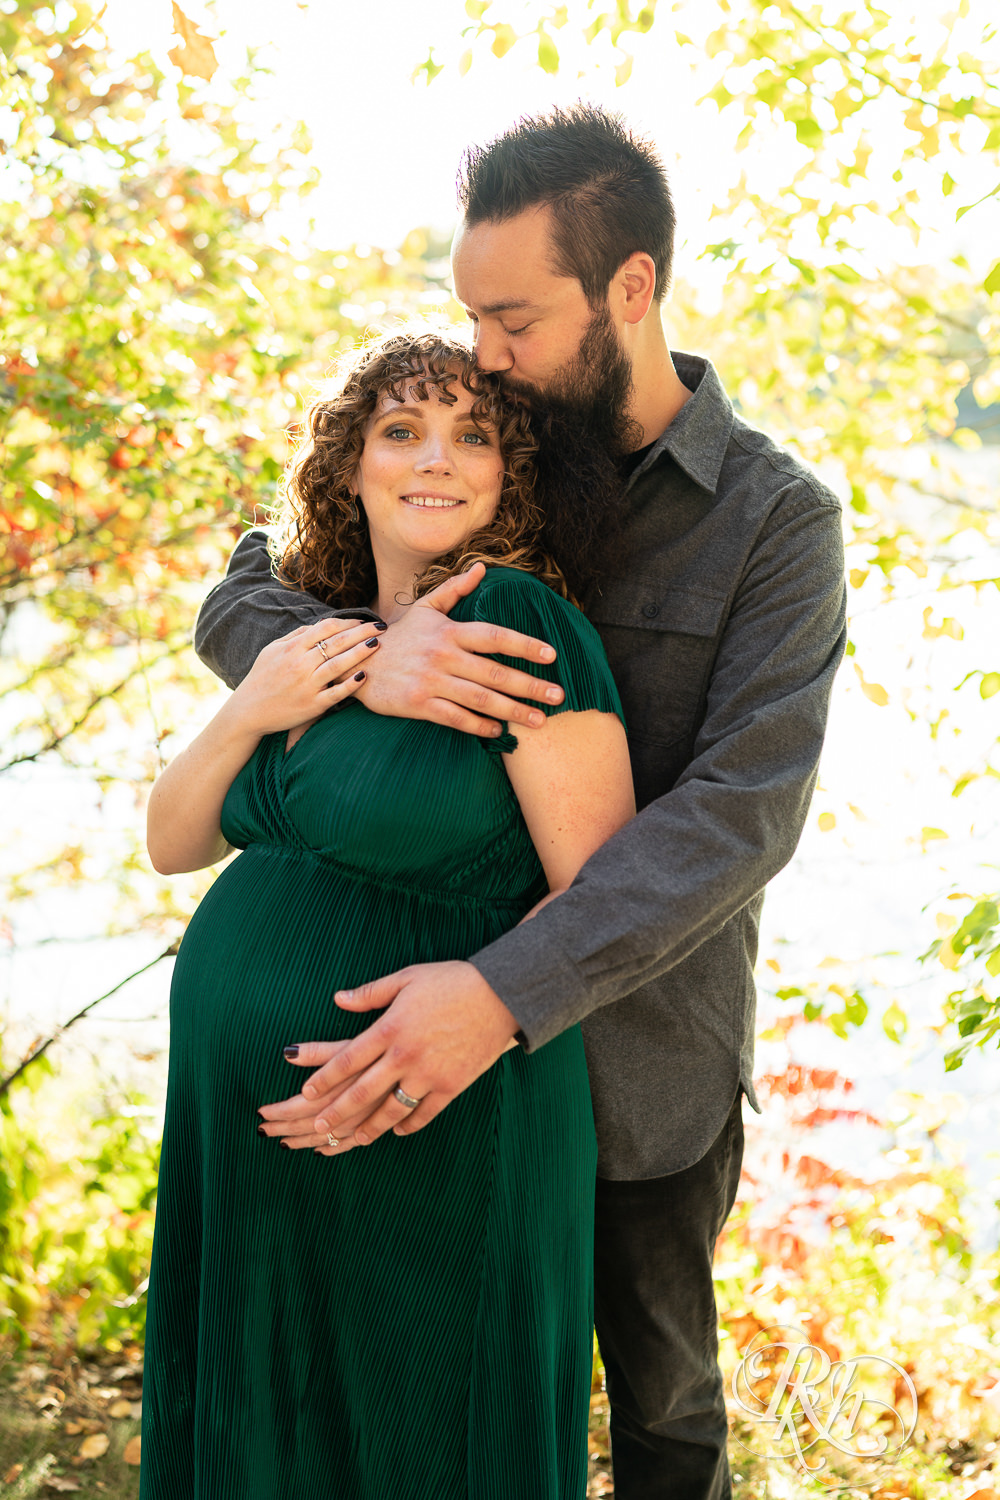 Pregnant woman in green dress and man kiss and hold belly in Lebanon Hills Regional Park in Eagan, Minnesota.